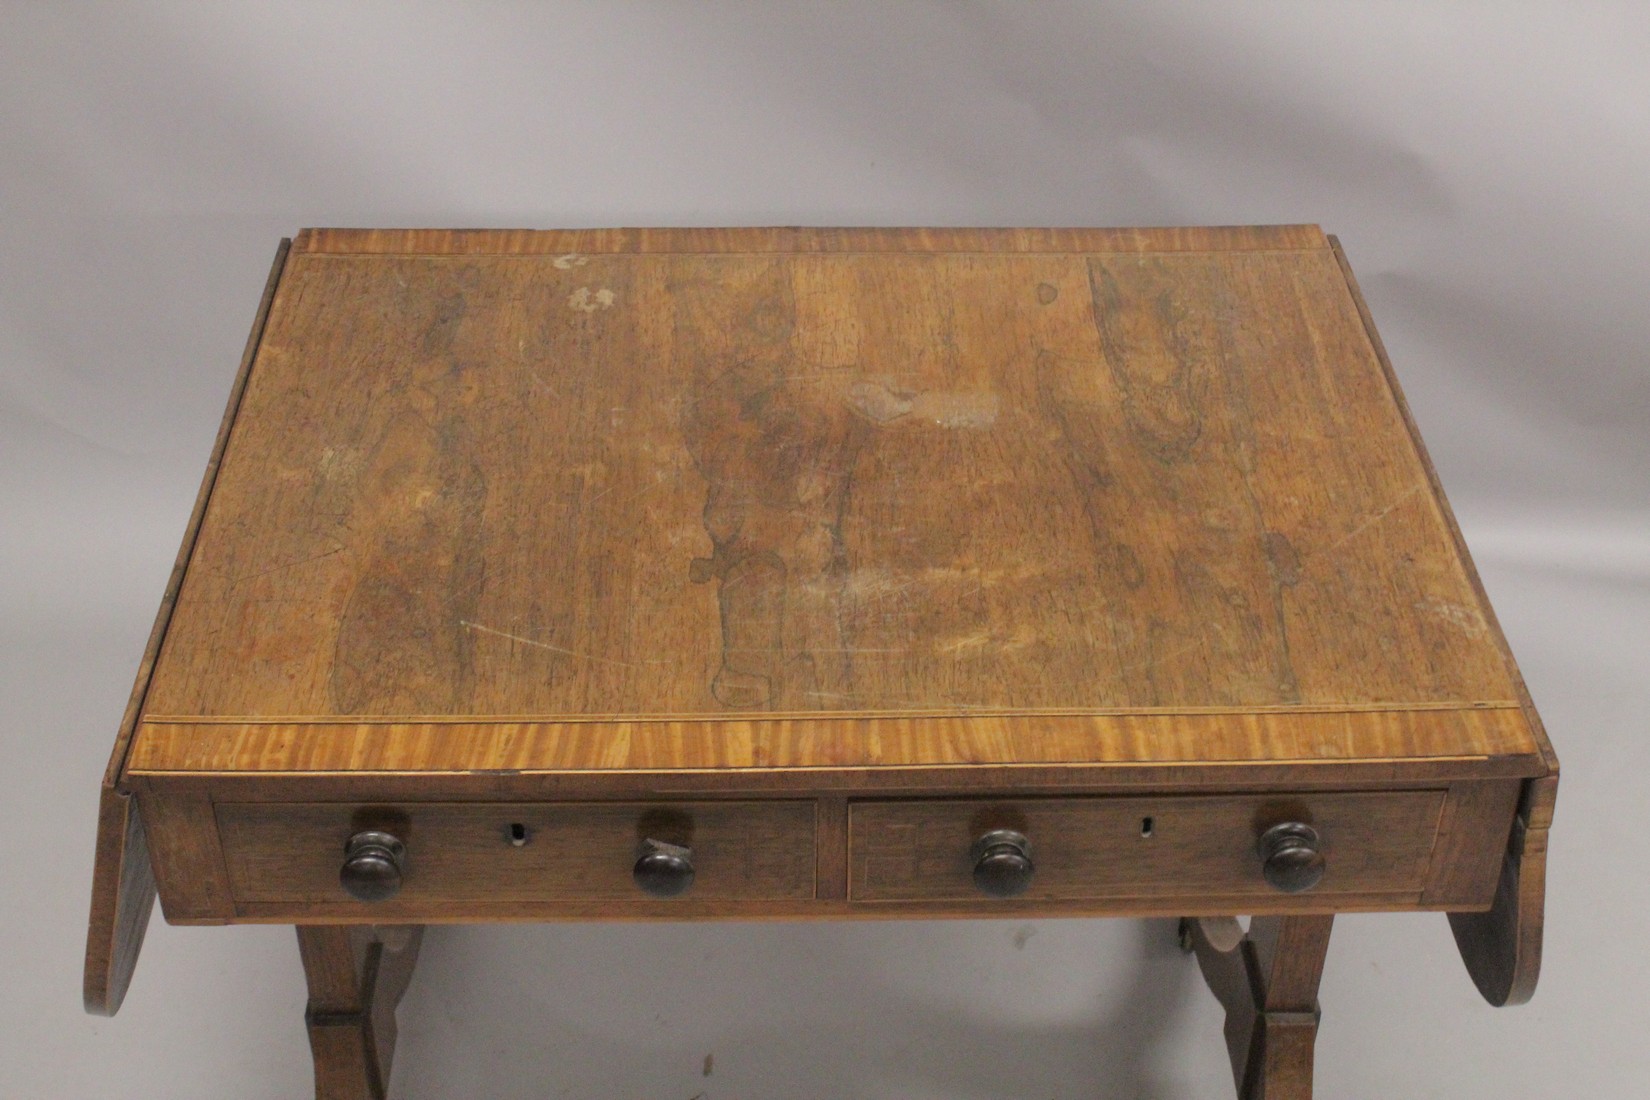 A REGENCY ROSEWOOD SOFA TABLE with folding flaps, on curving legs with casters. 4ft 4ins long - Image 2 of 4